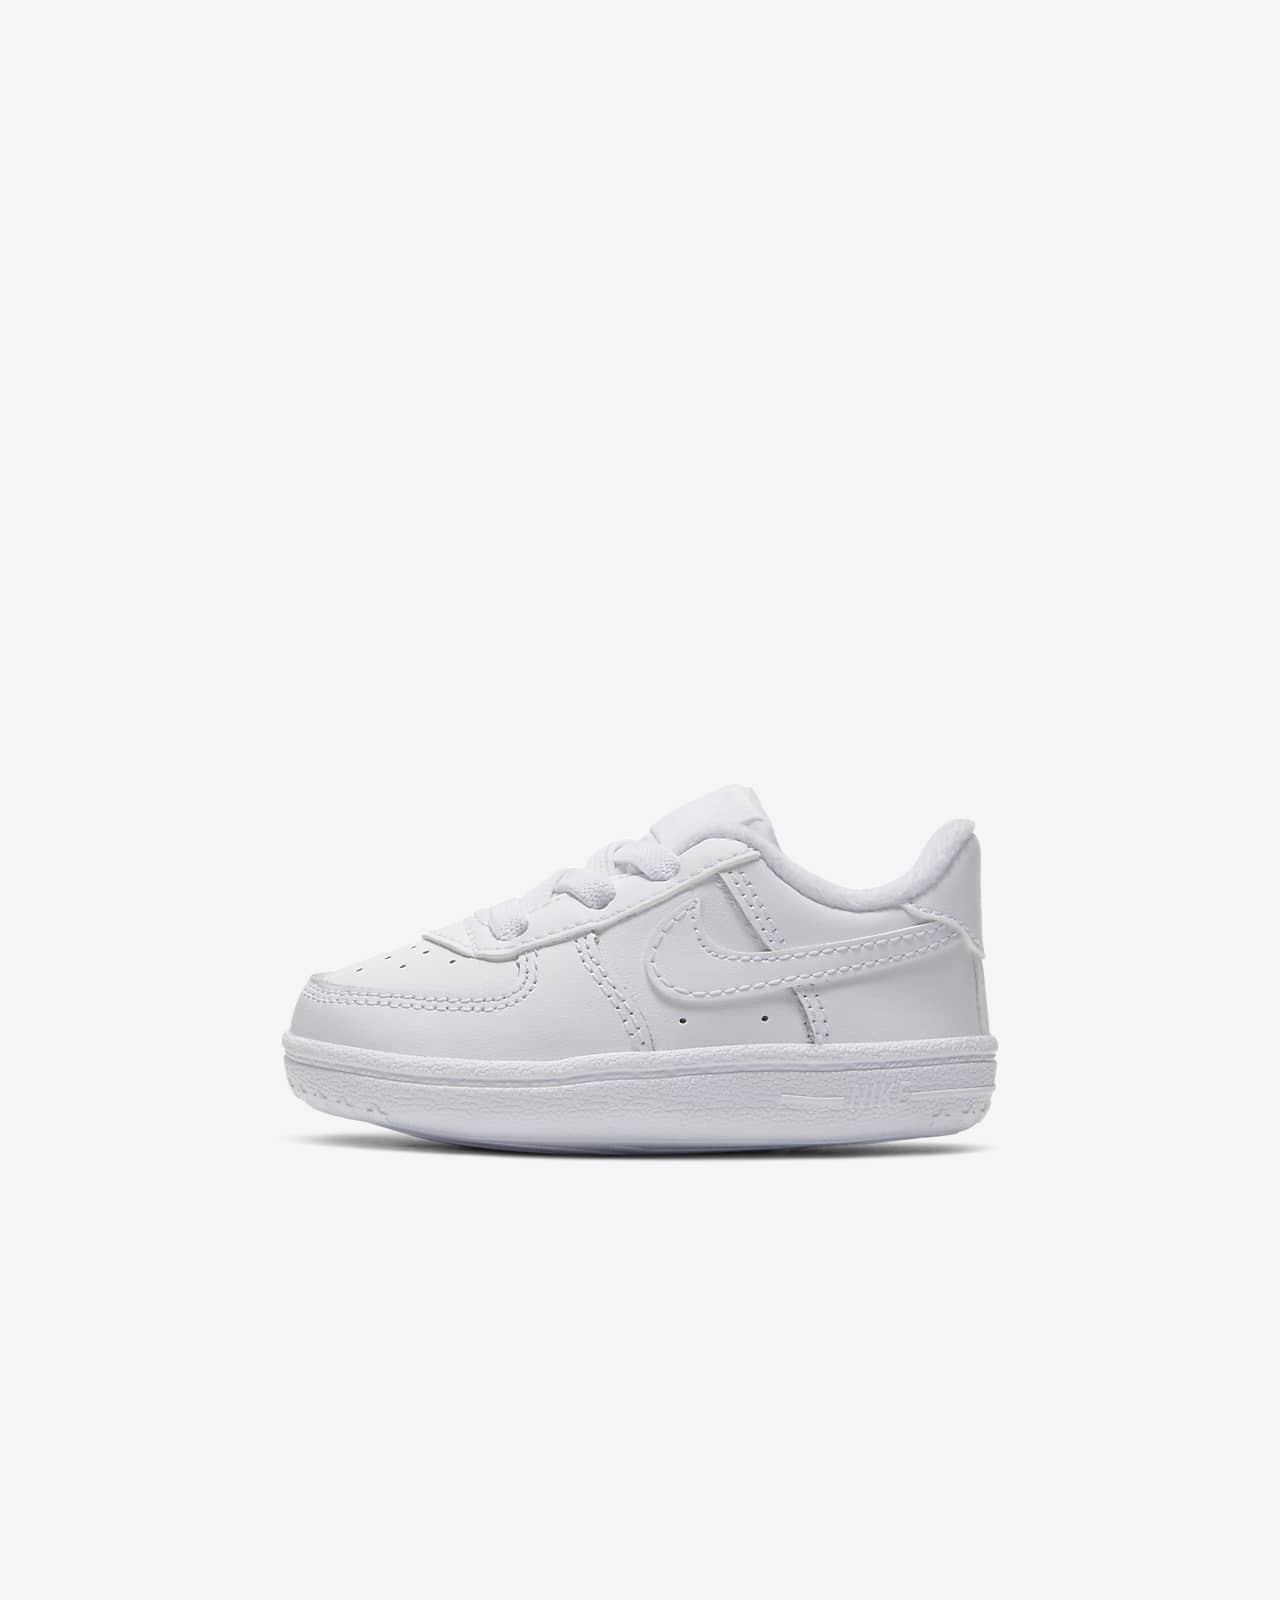 Nike Force 1 Cot Baby Bootie. Nike GB